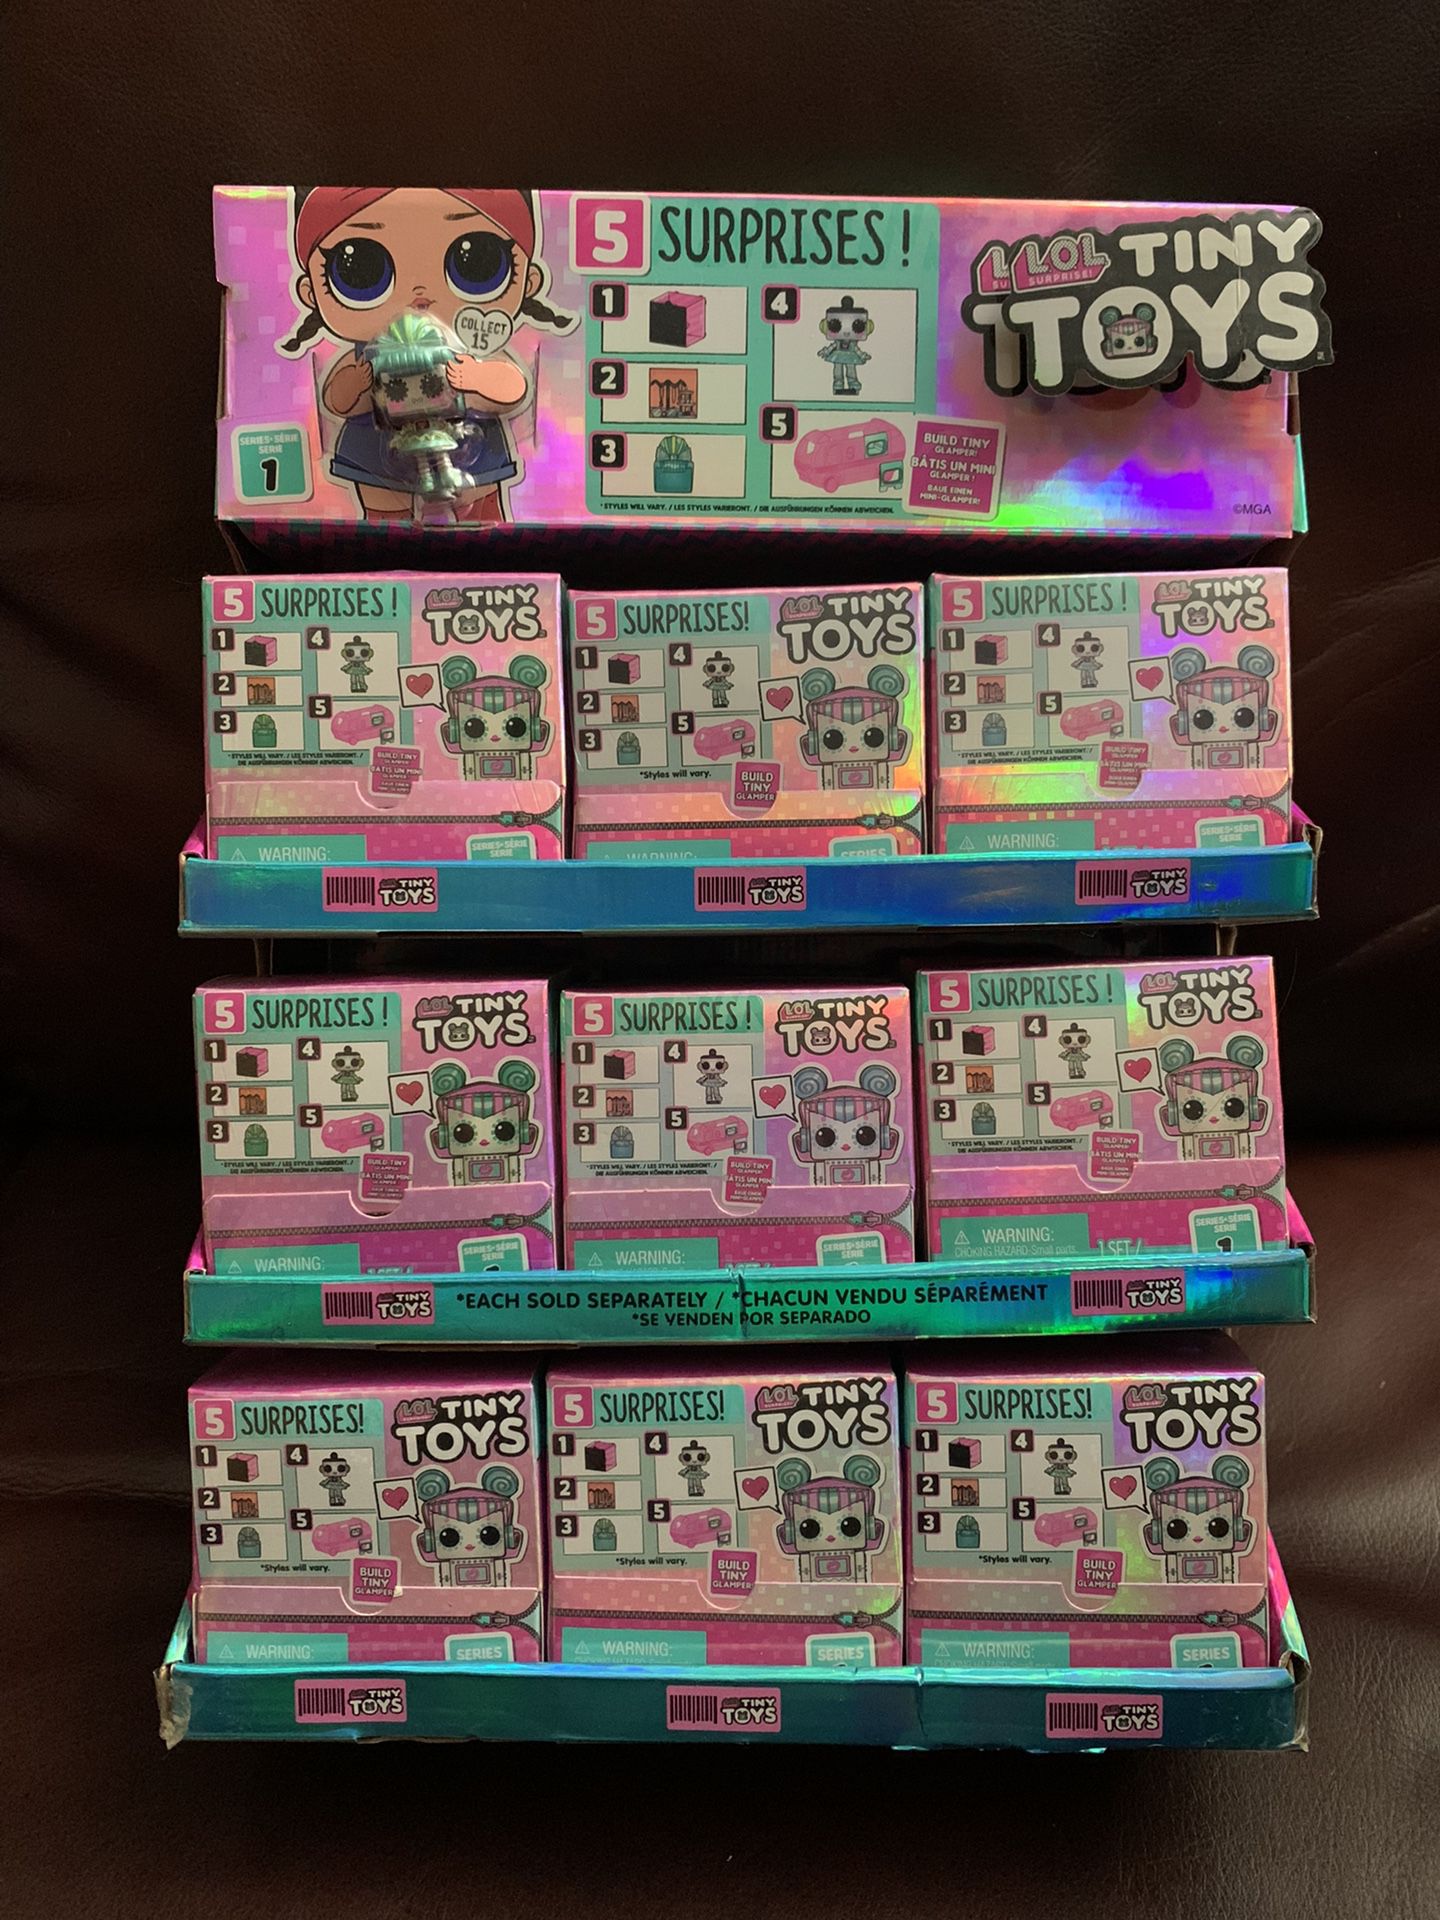 18 Pieces L.O.L. Surprise! Tiny Toys - Collect to Build a Tiny Glamper - Not Full Set, Duplicates. 